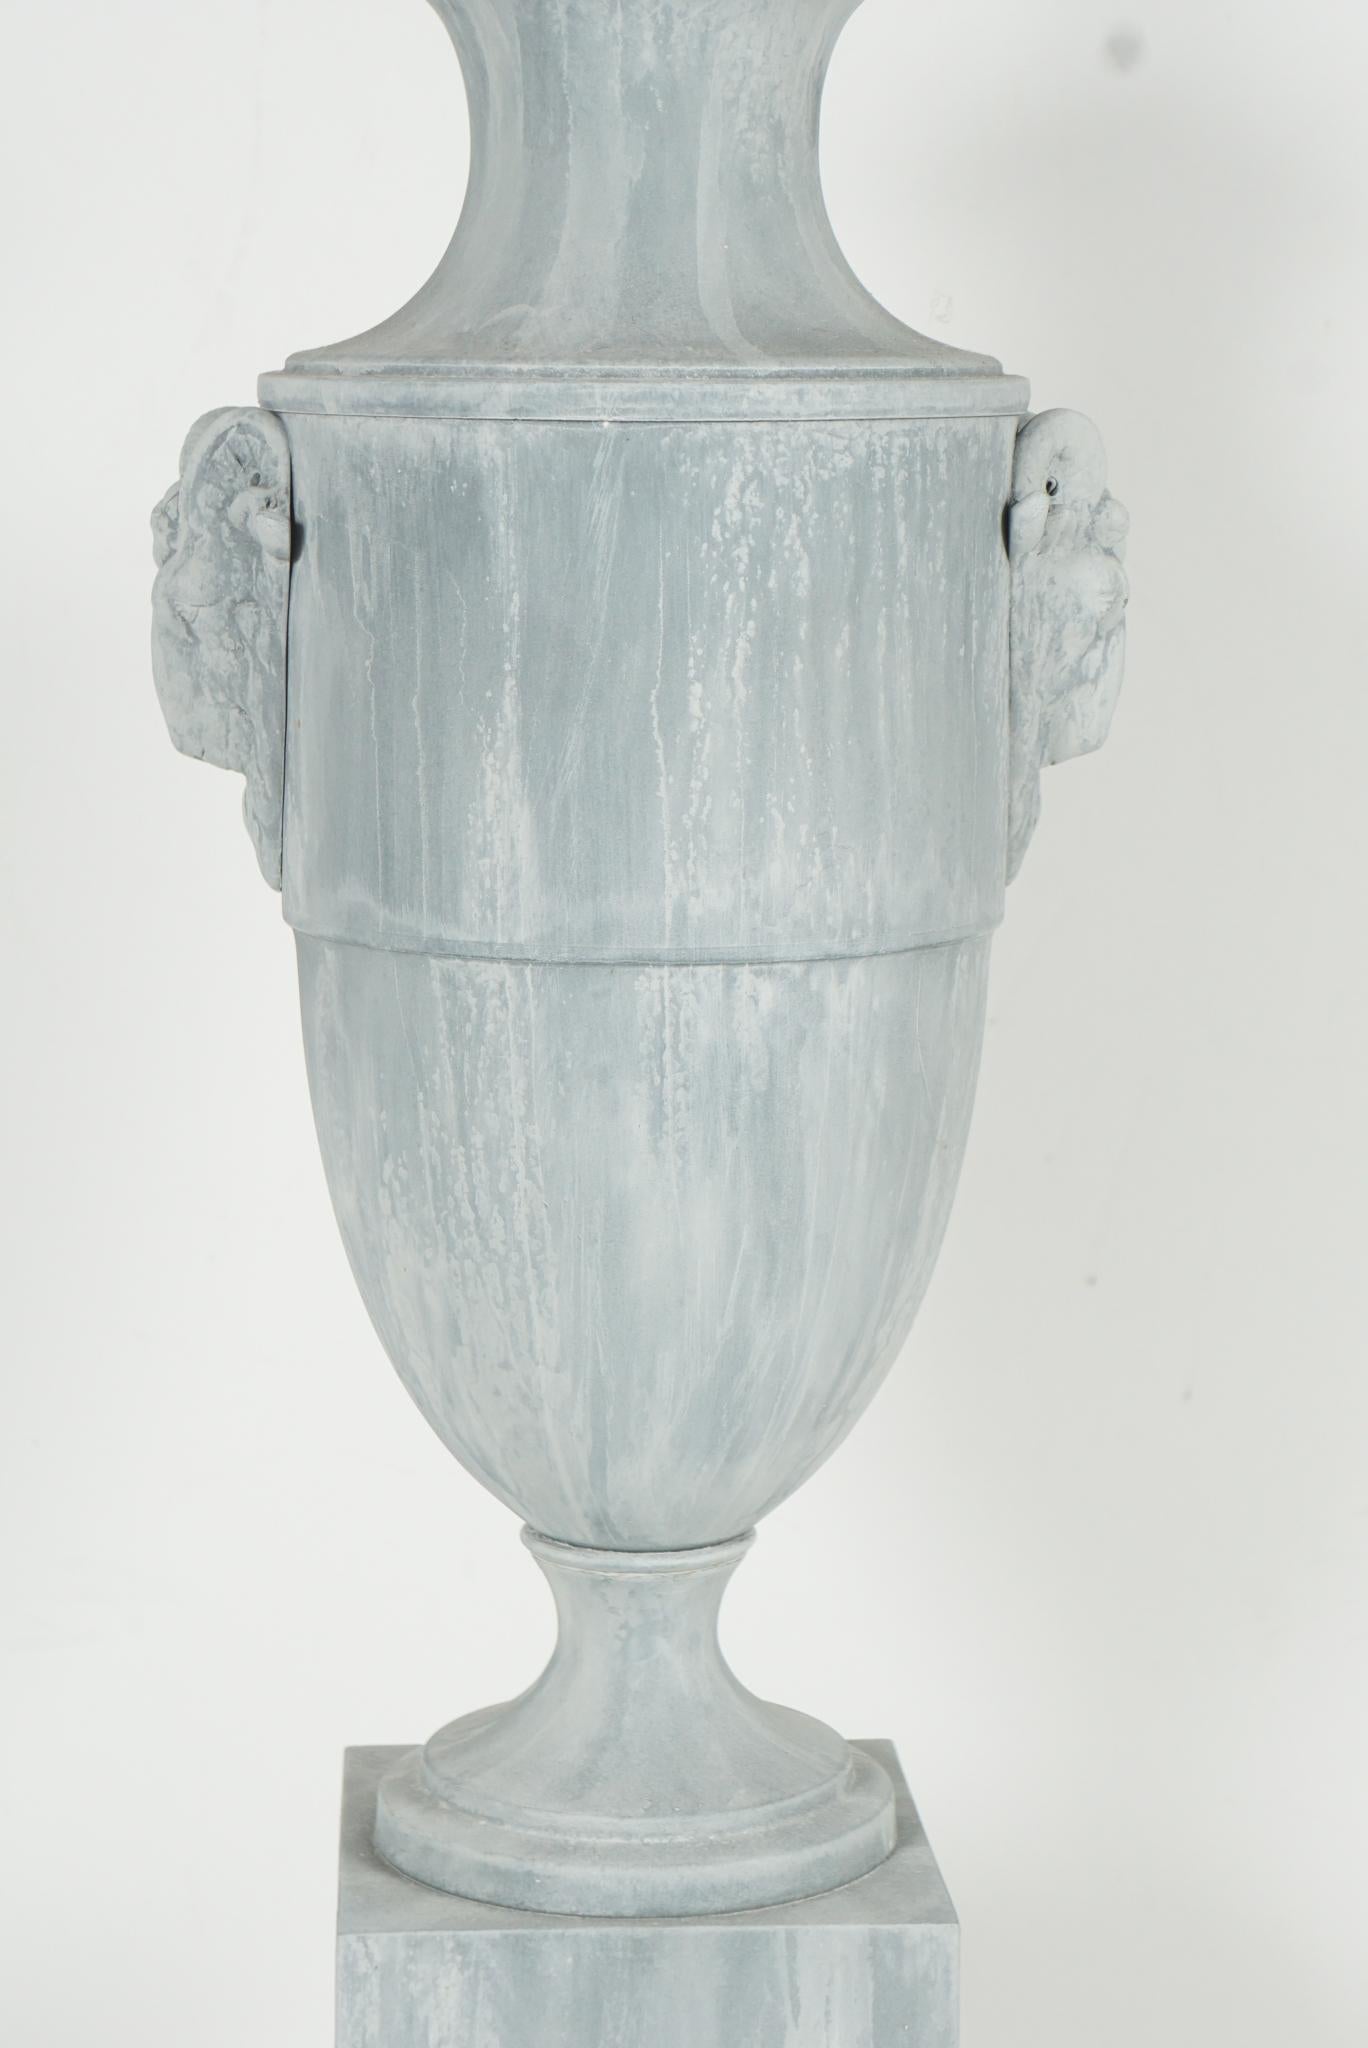 Early 20th Century French Zinc Urn Lamp from the Estate of Bunny Mellon In Good Condition For Sale In Hudson, NY